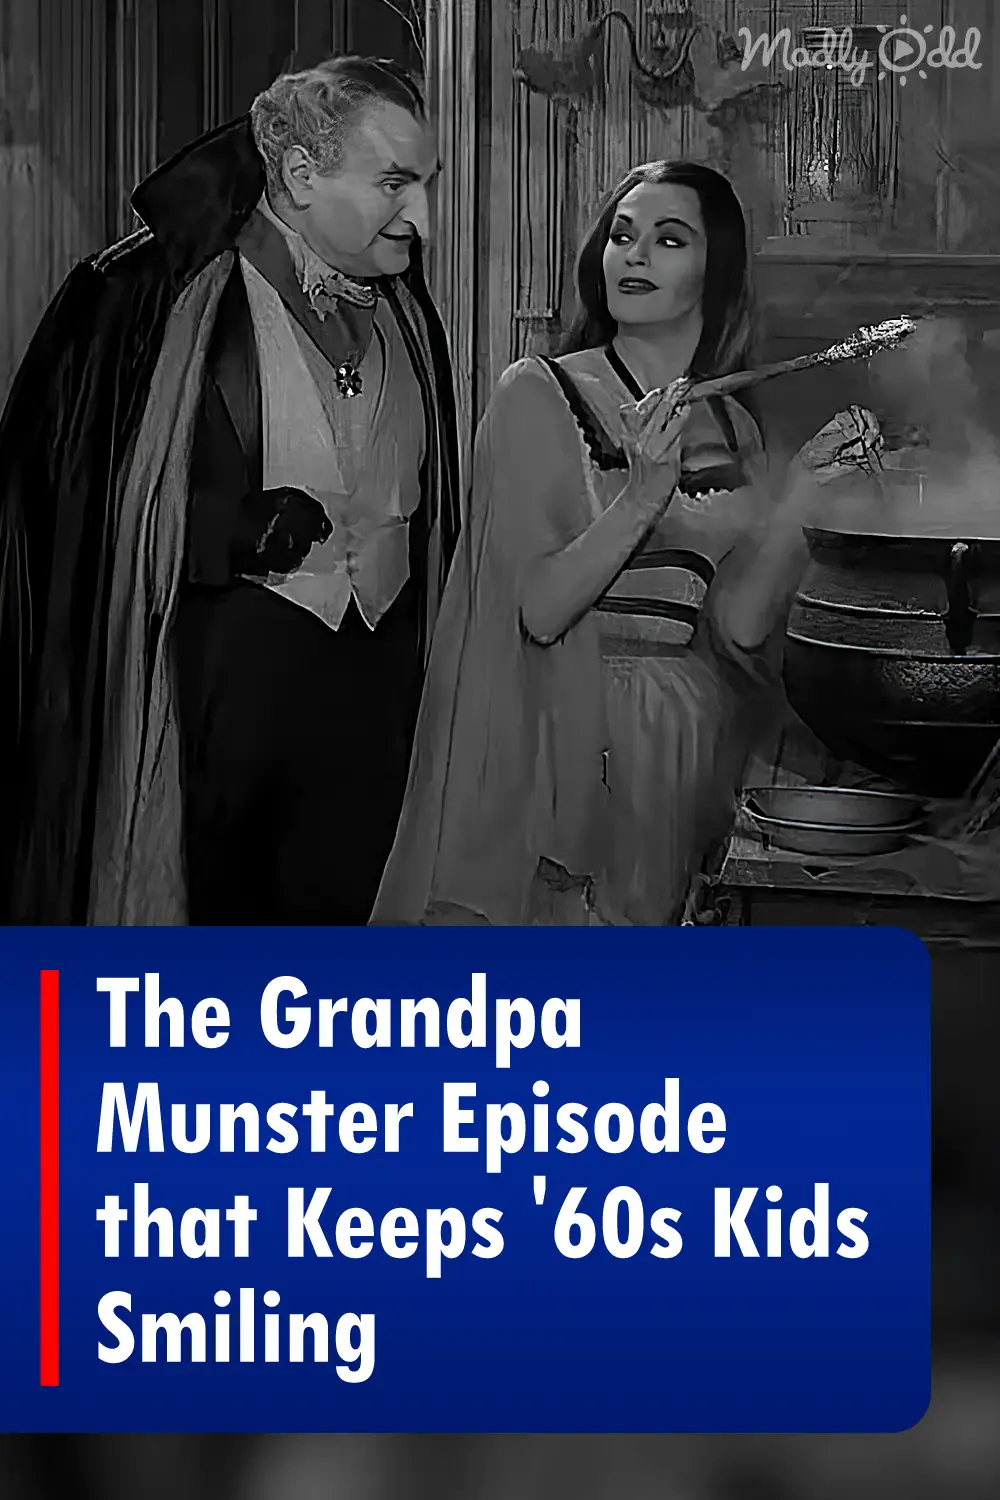 The Grandpa Munster Episode that Keeps \'60s Kids Smiling